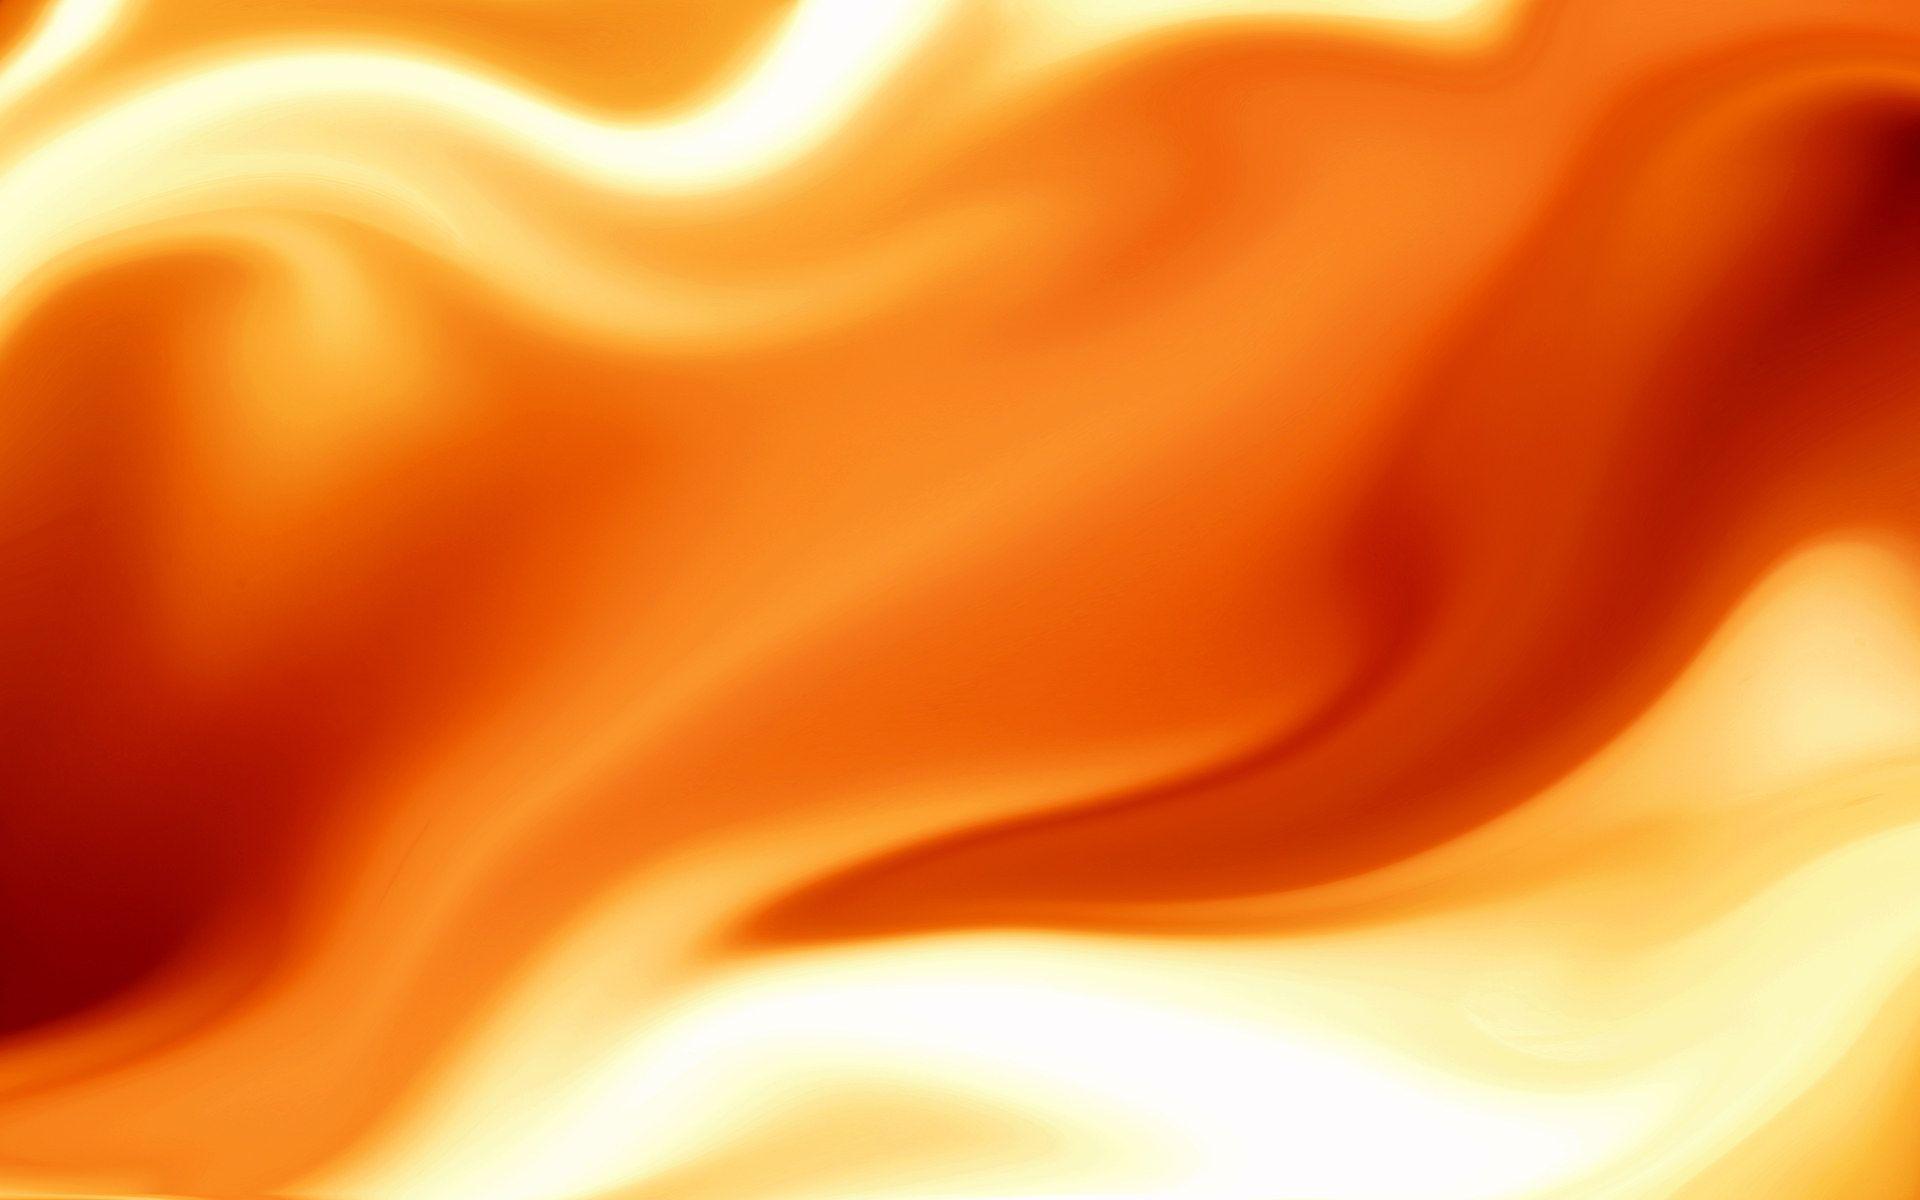 Background, orange, colour, abstract, bcolors, gallery